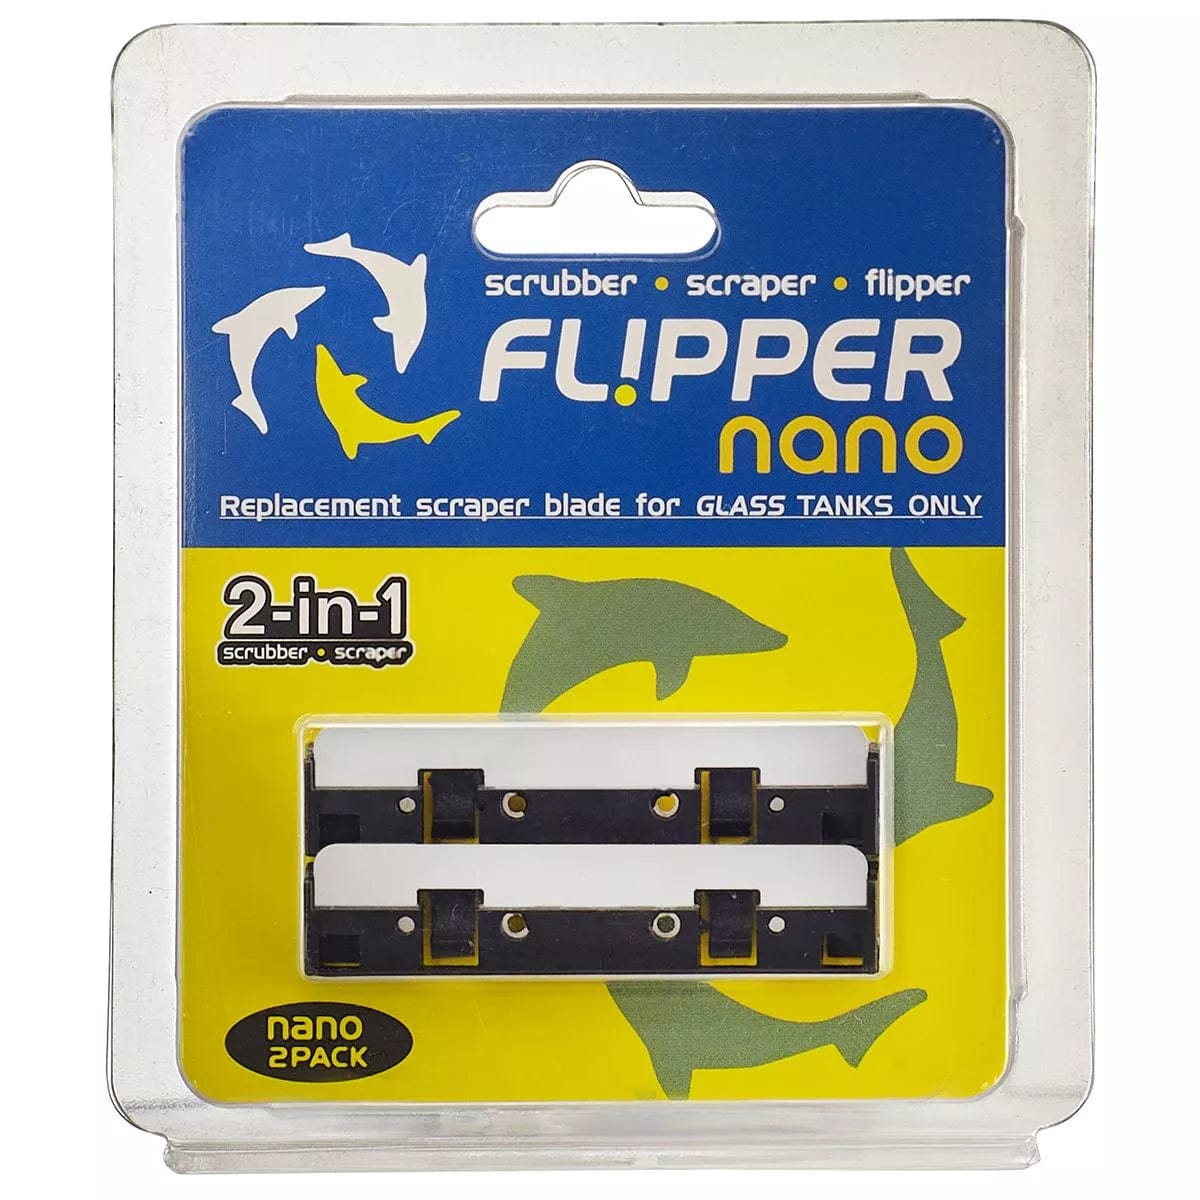 Flipper Nano Replacement Stainless Steel Blades - 2pk